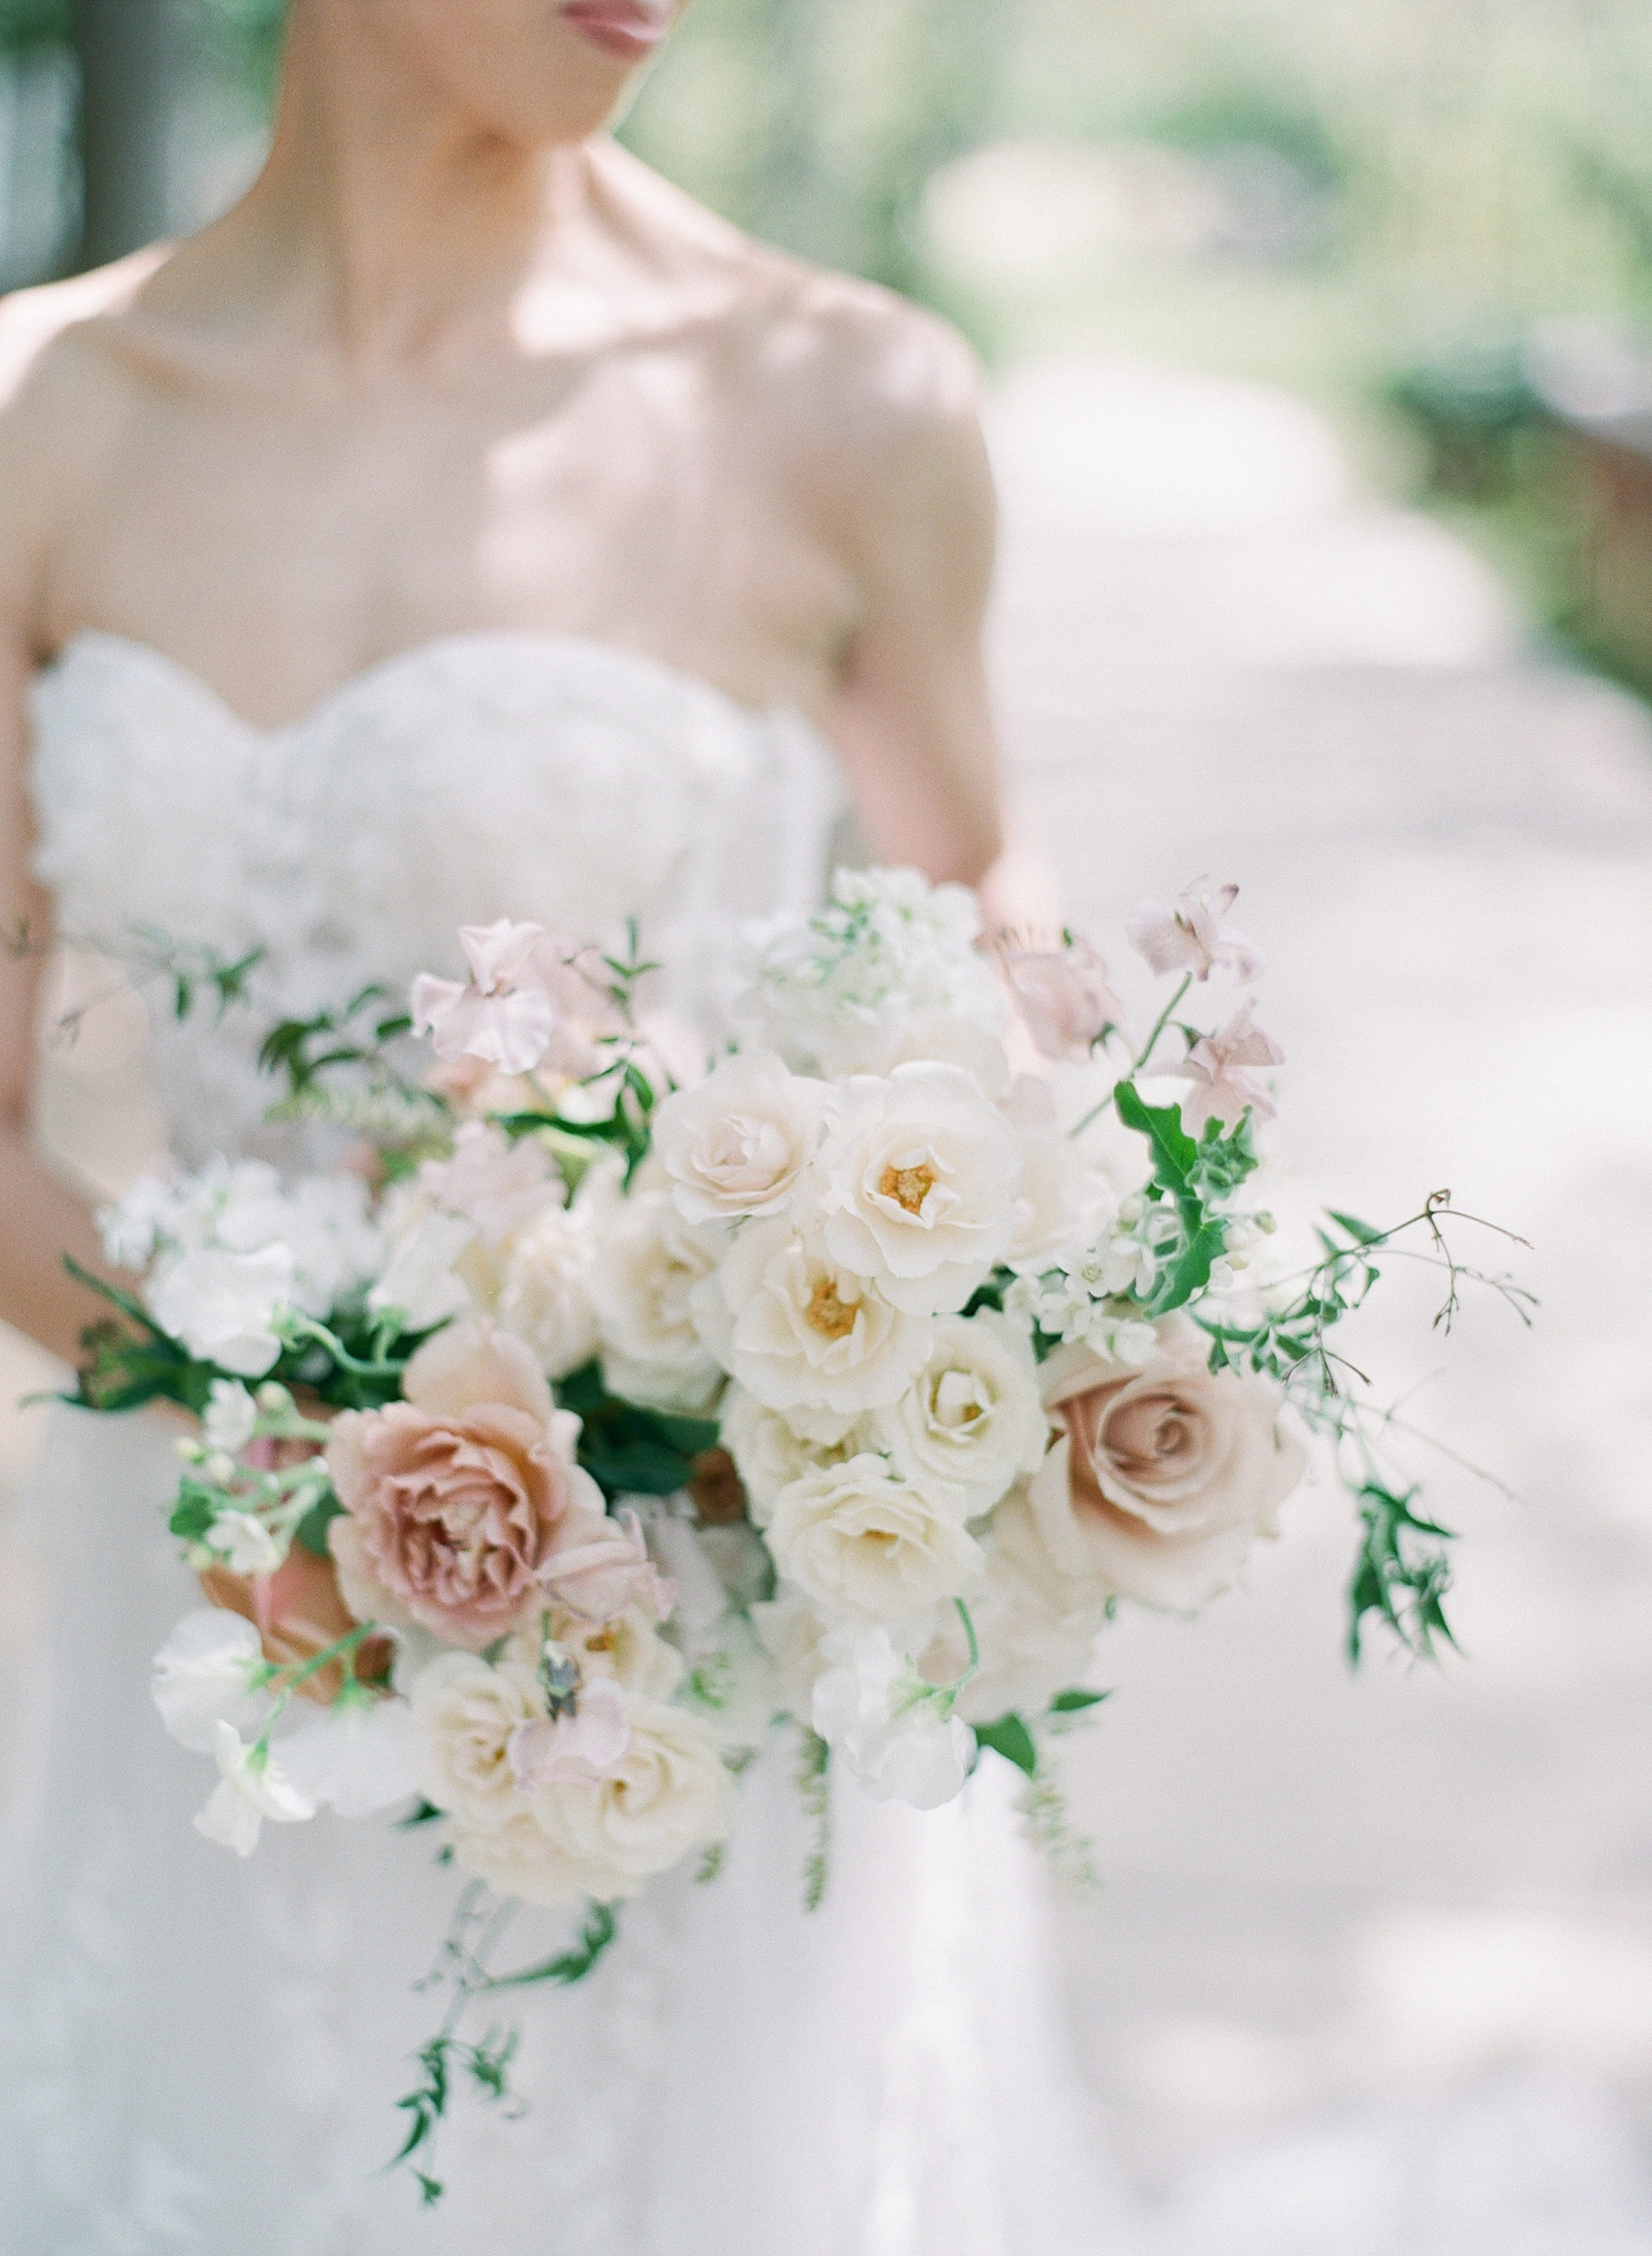 Soft and neutral bouquet